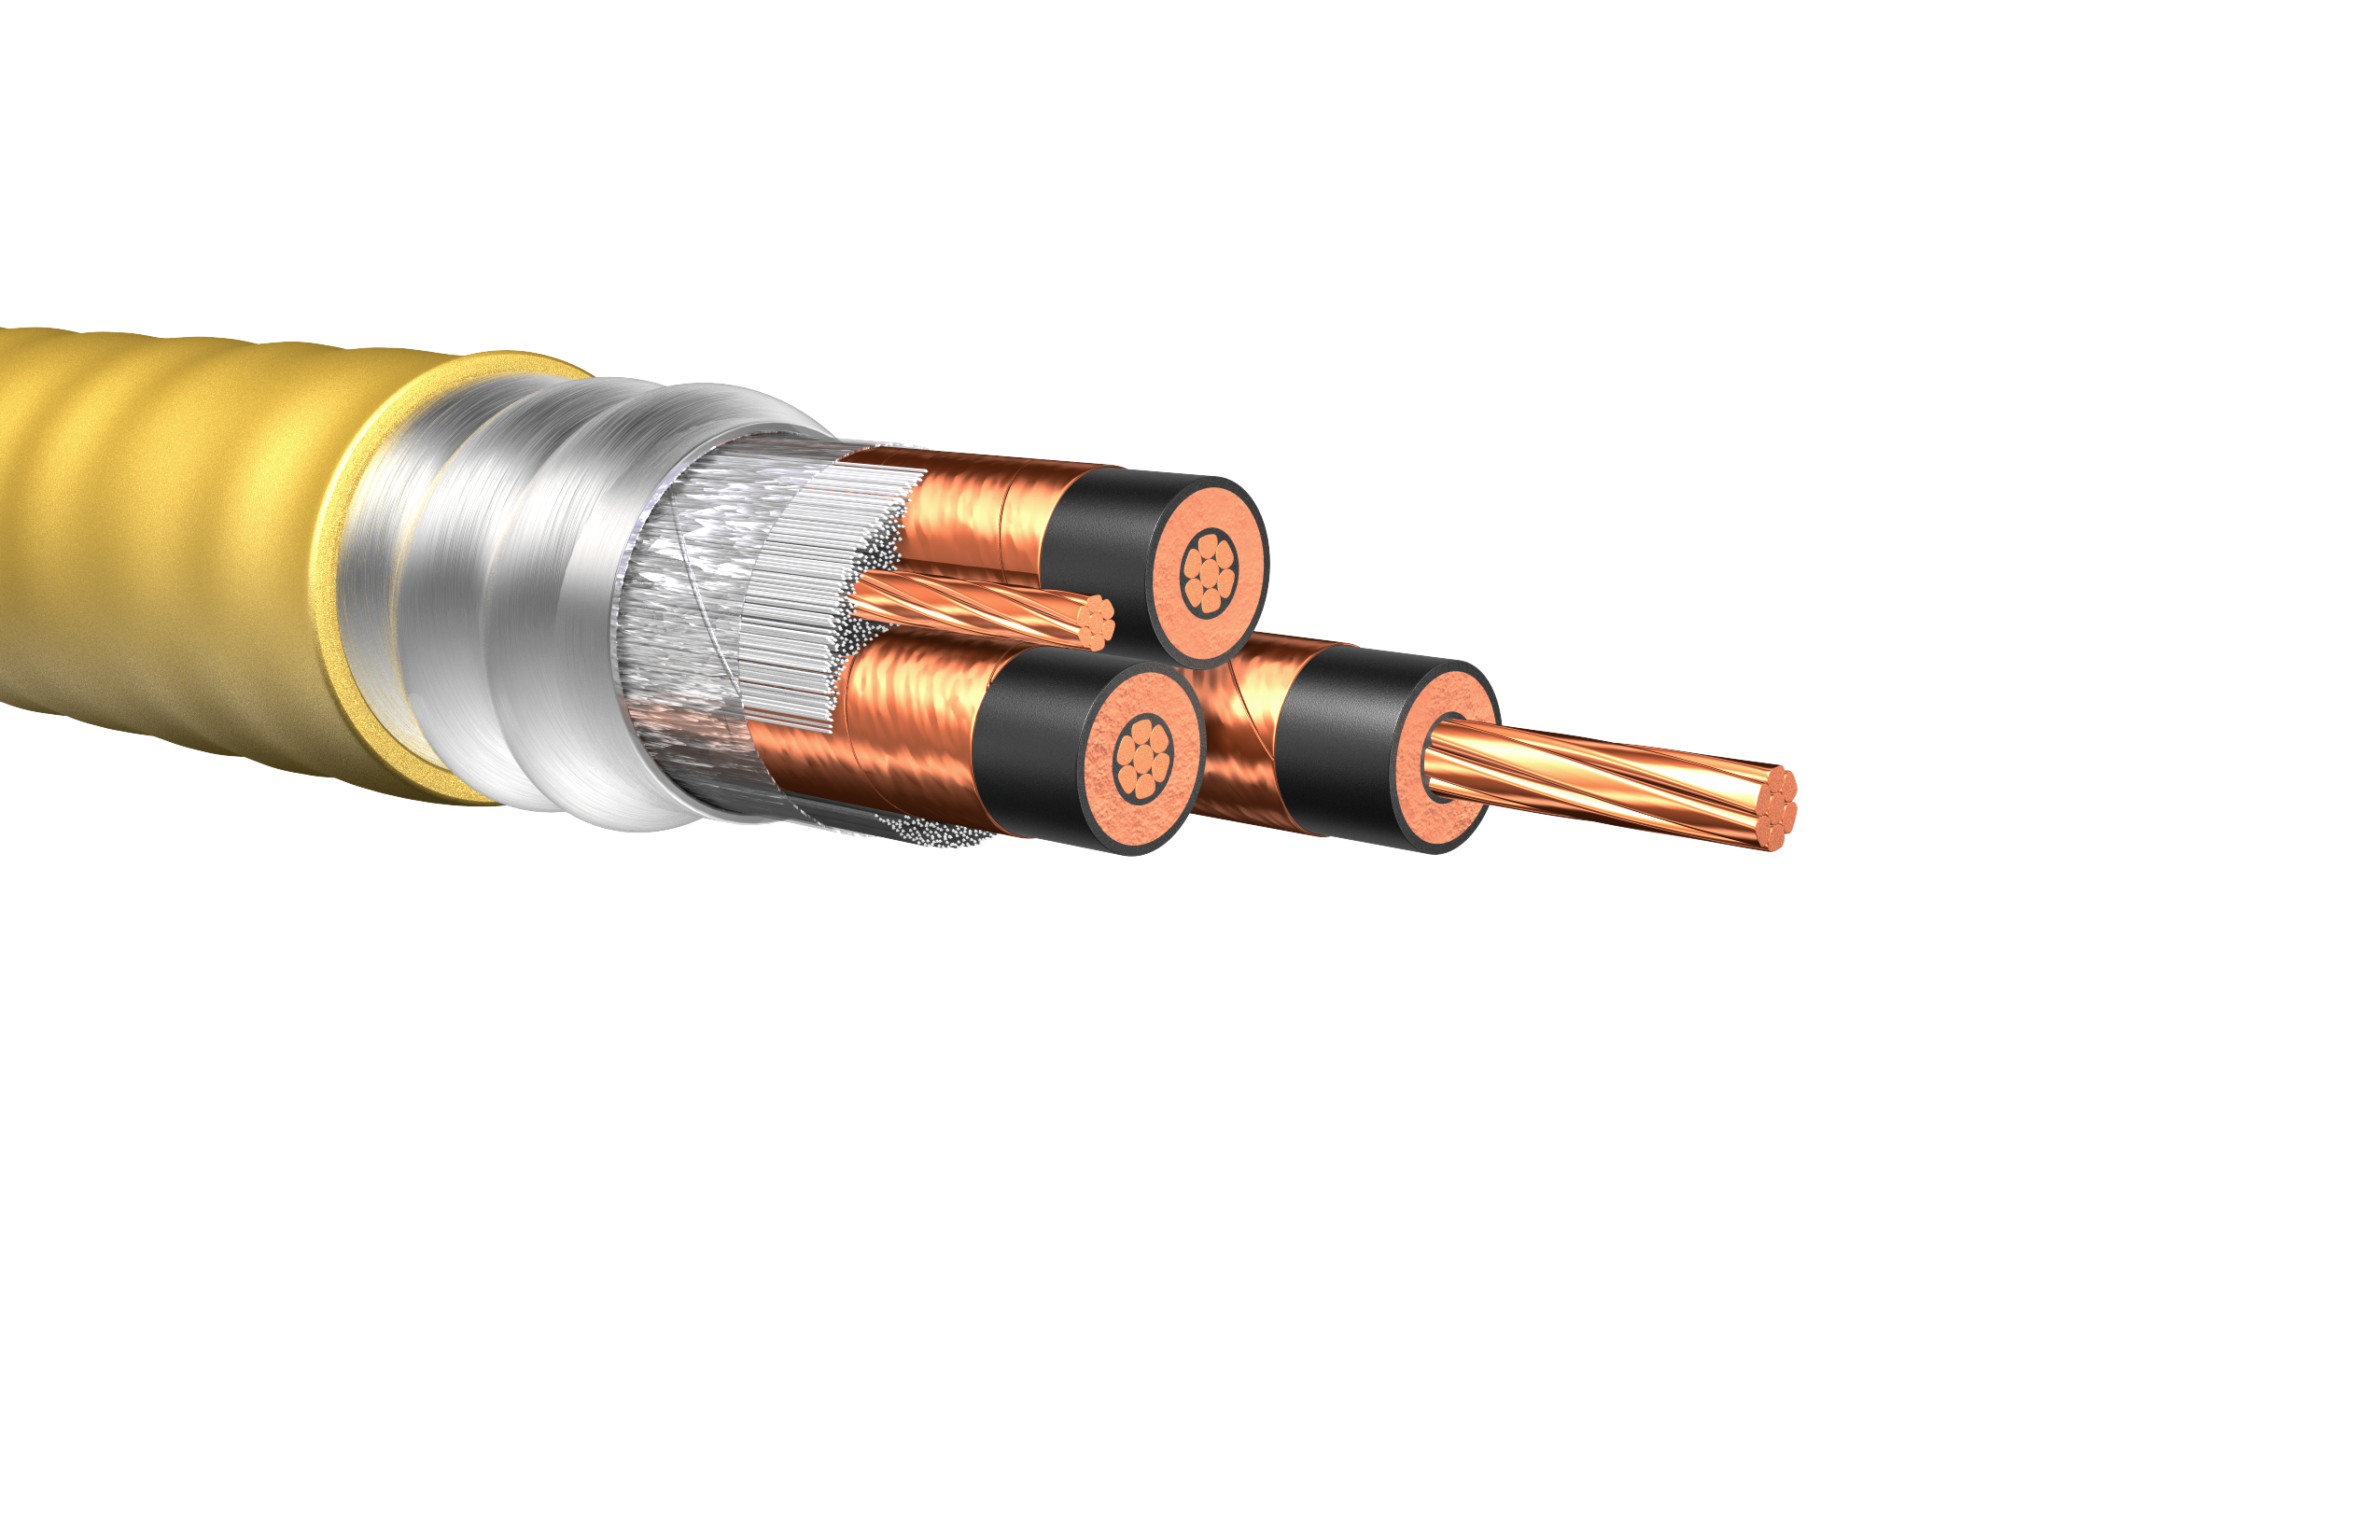 HW310: 5kV CCW Shielded Cable, Type MC-HL